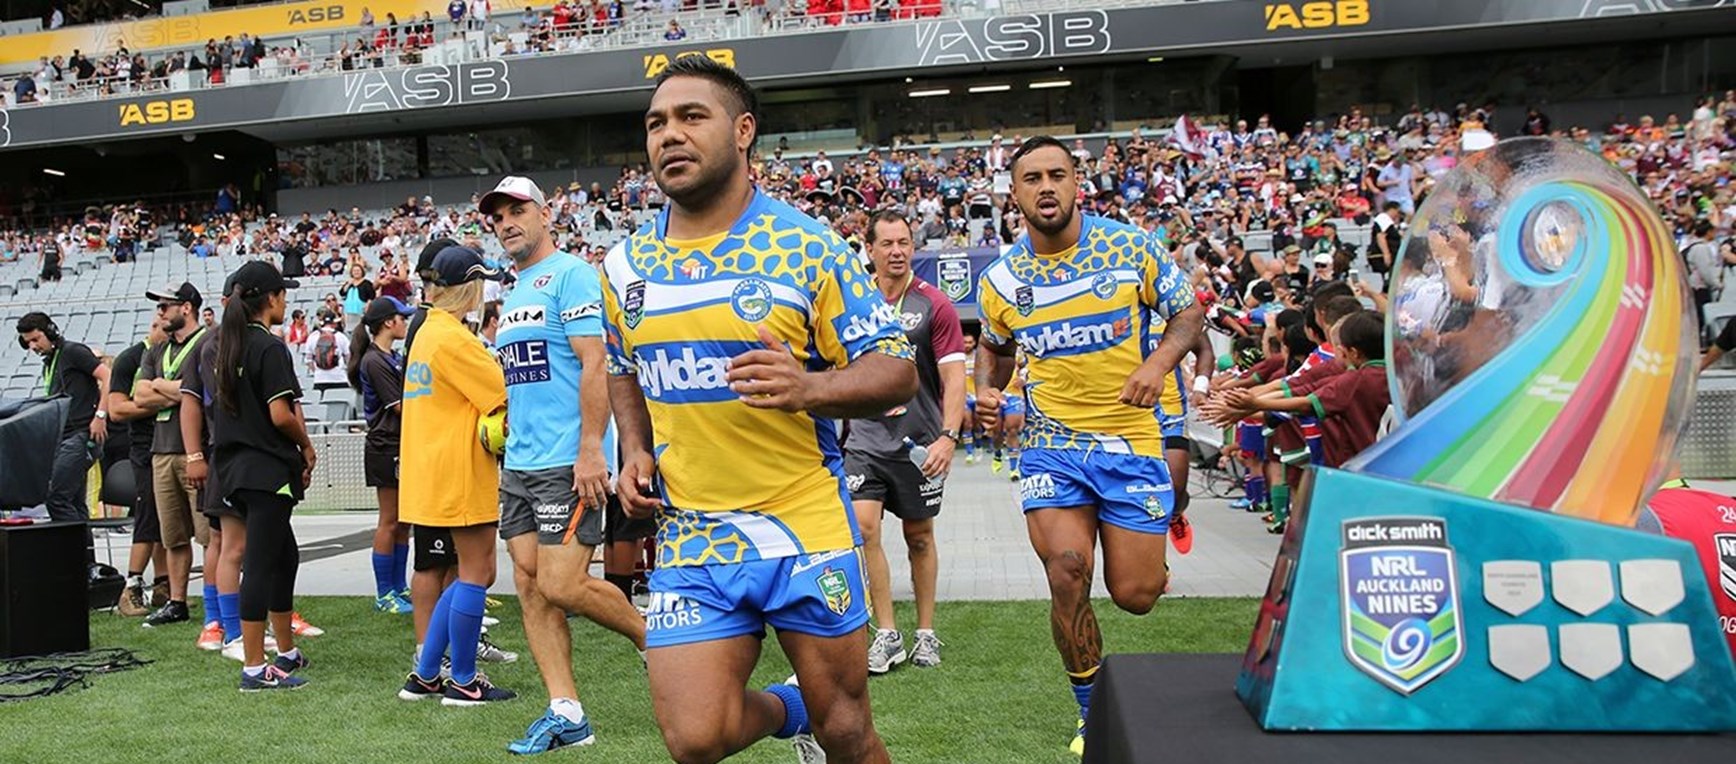 Auckland Nines - Day 1 in pictures